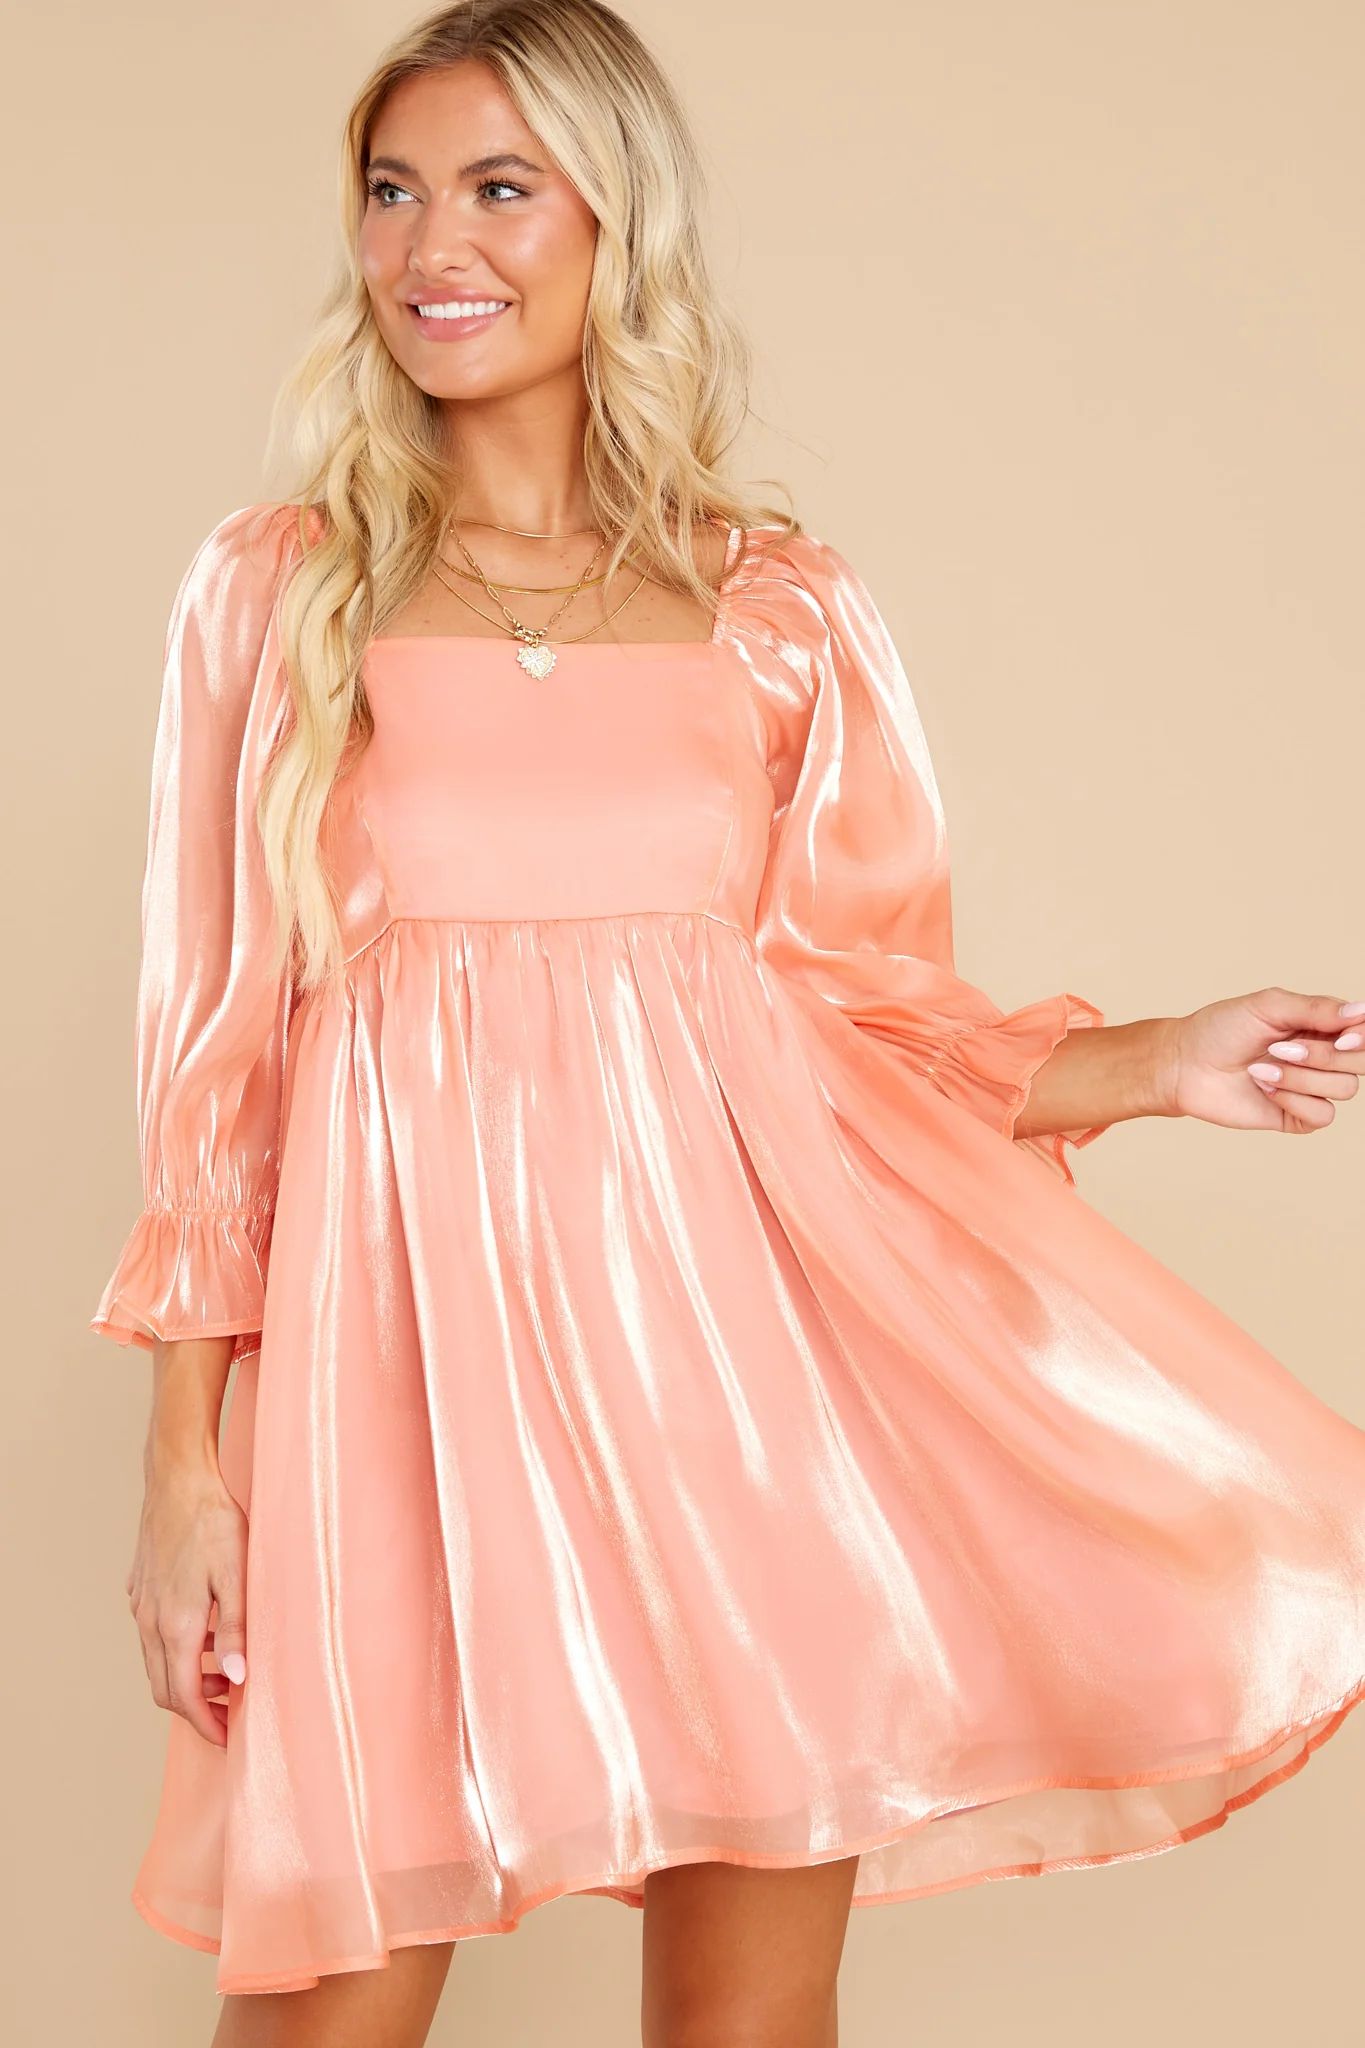 Madly In Love Apricot Dress | Red Dress 